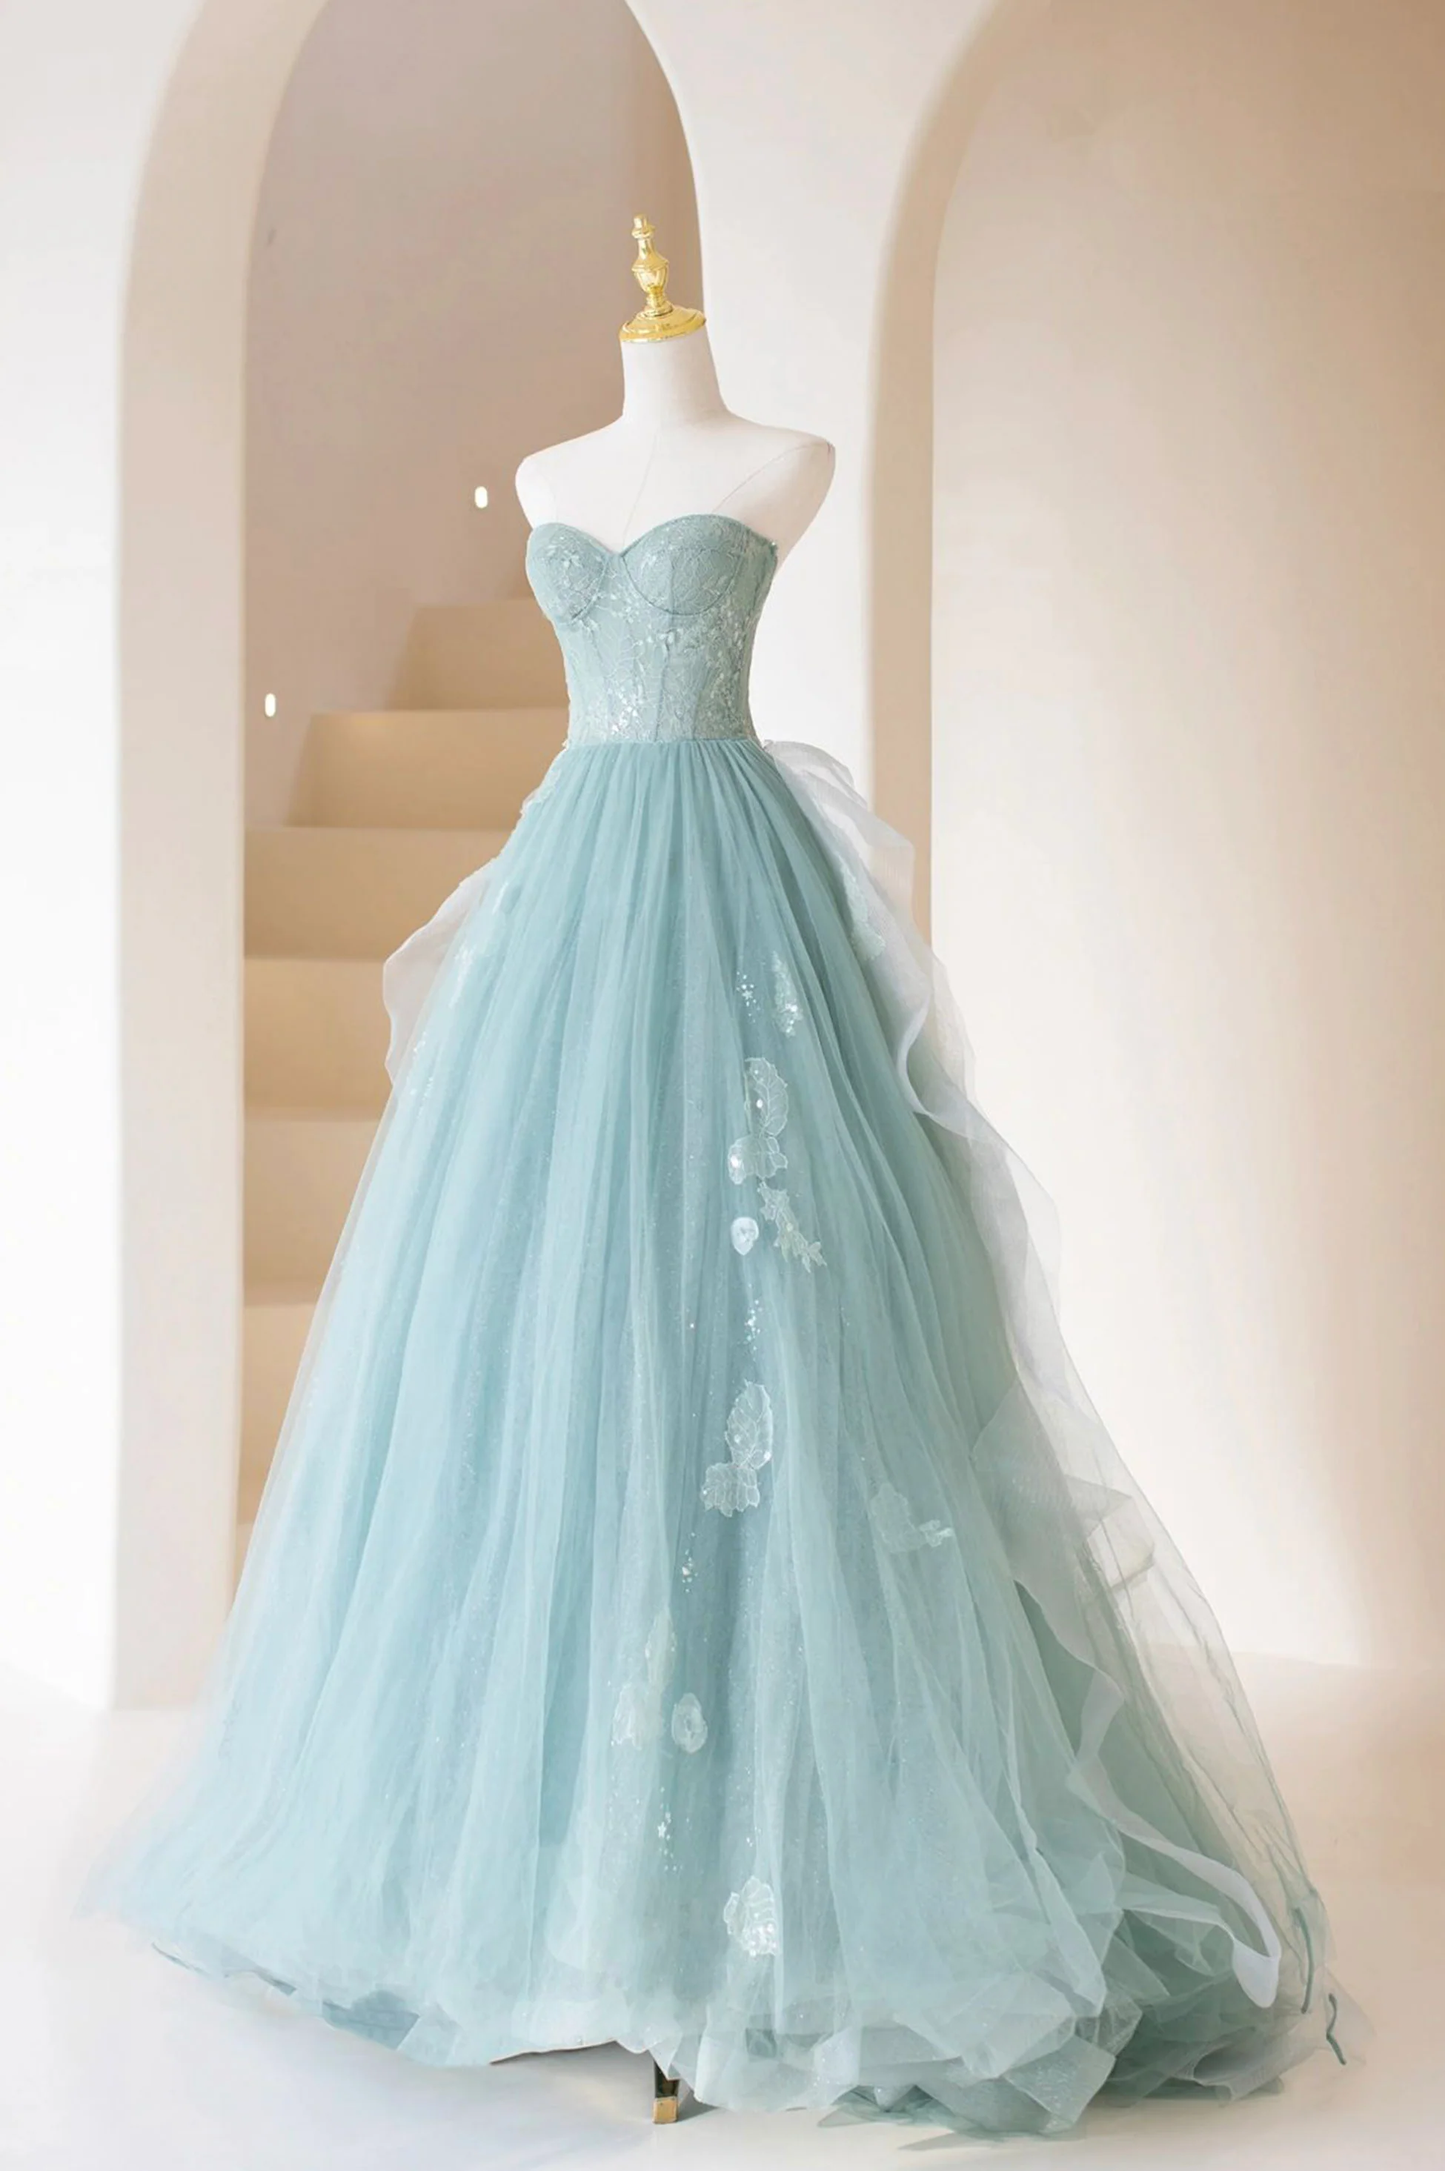 Cute Tulle Strapless Long Prom Dress, A-Line Lace Formal Evening Dress nv604